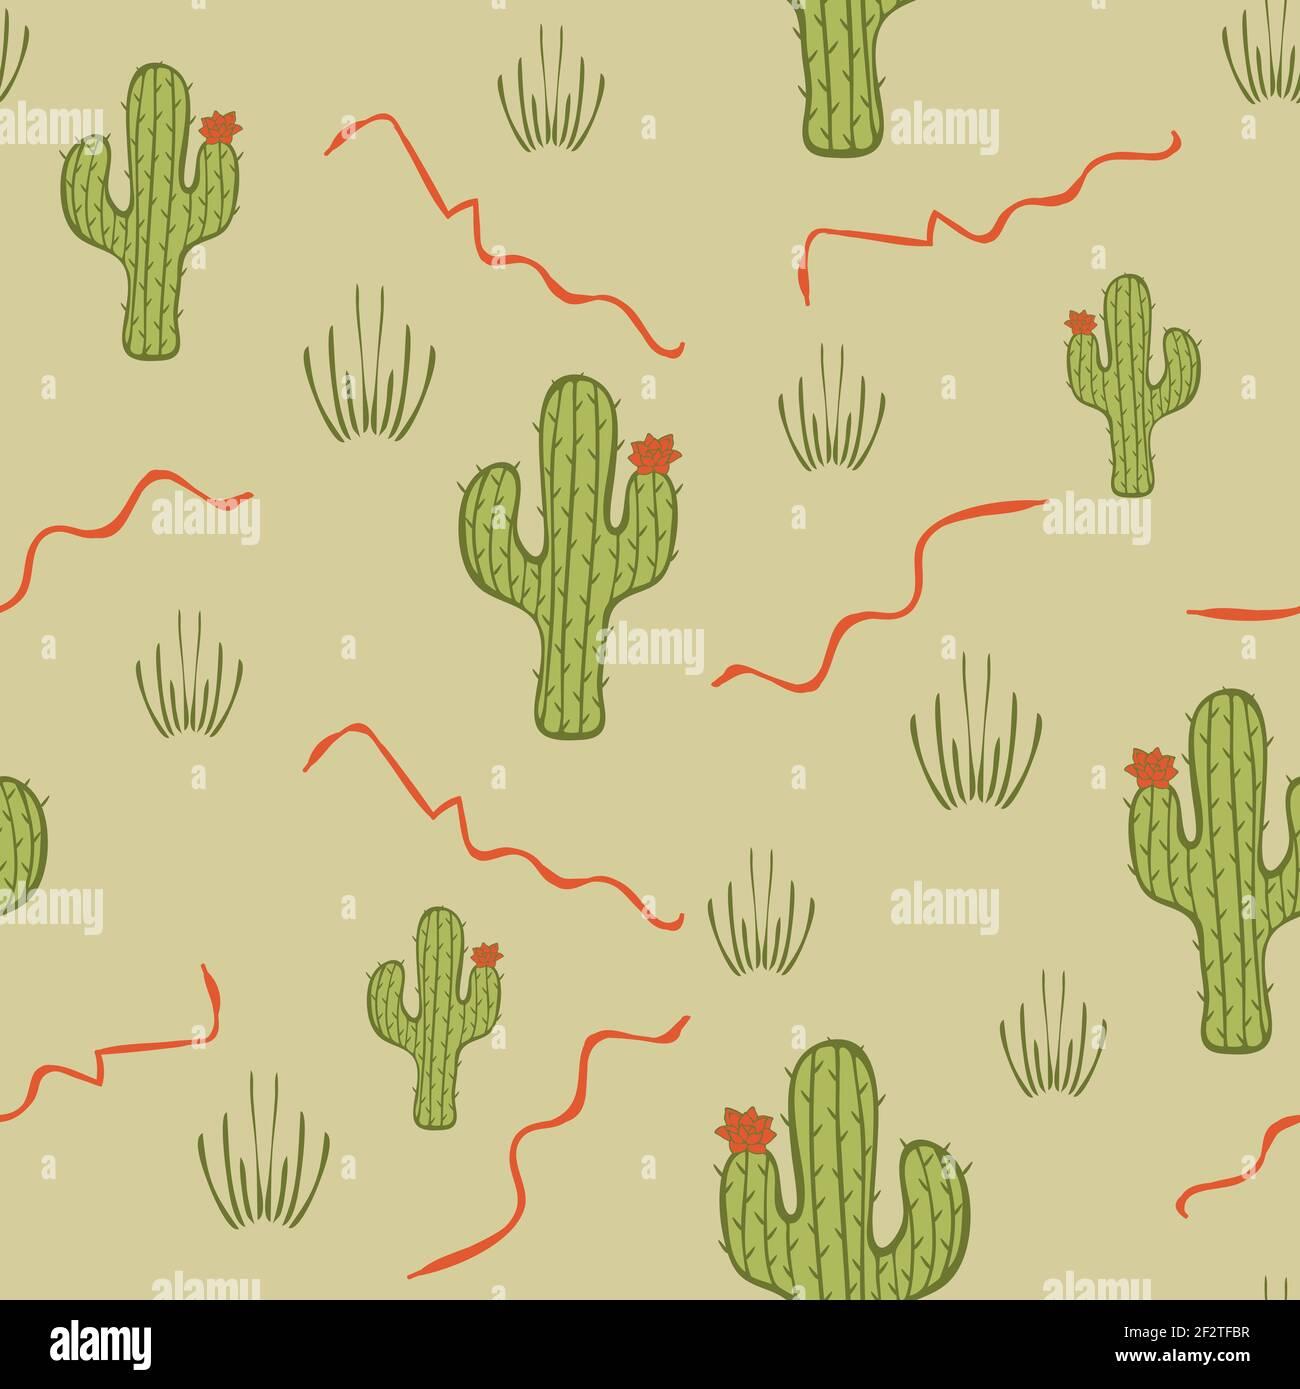 Seamless Vector Pattern With Cactus On Stone Grey Background